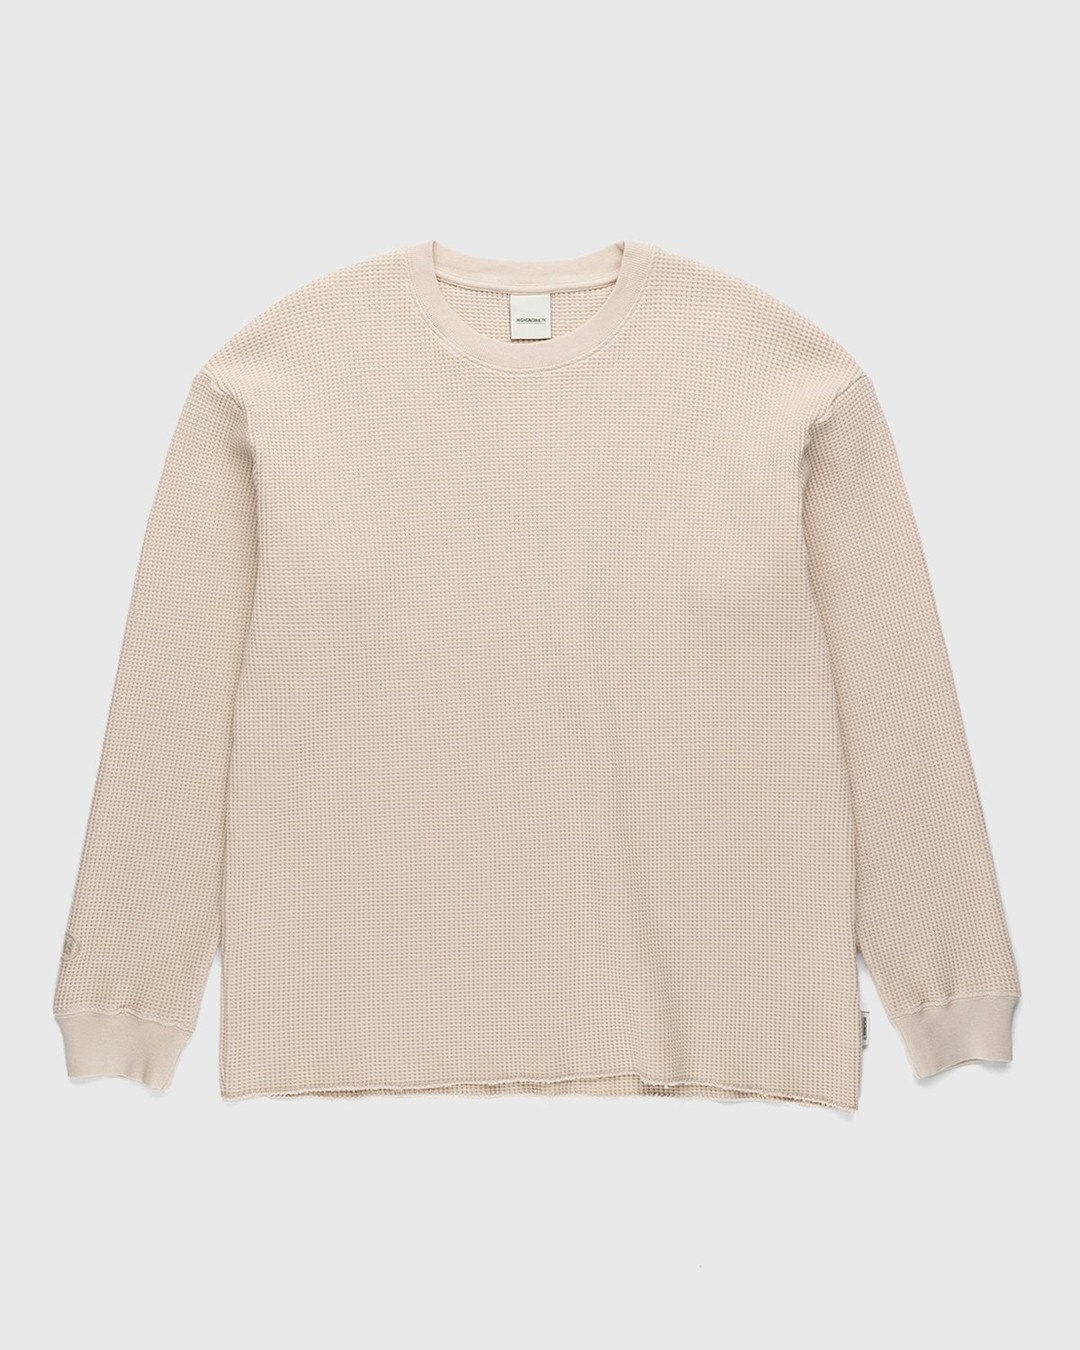 Highsnobiety – Thermal Staples Long Sleeve Off White - Sweats - Beige - Image 1